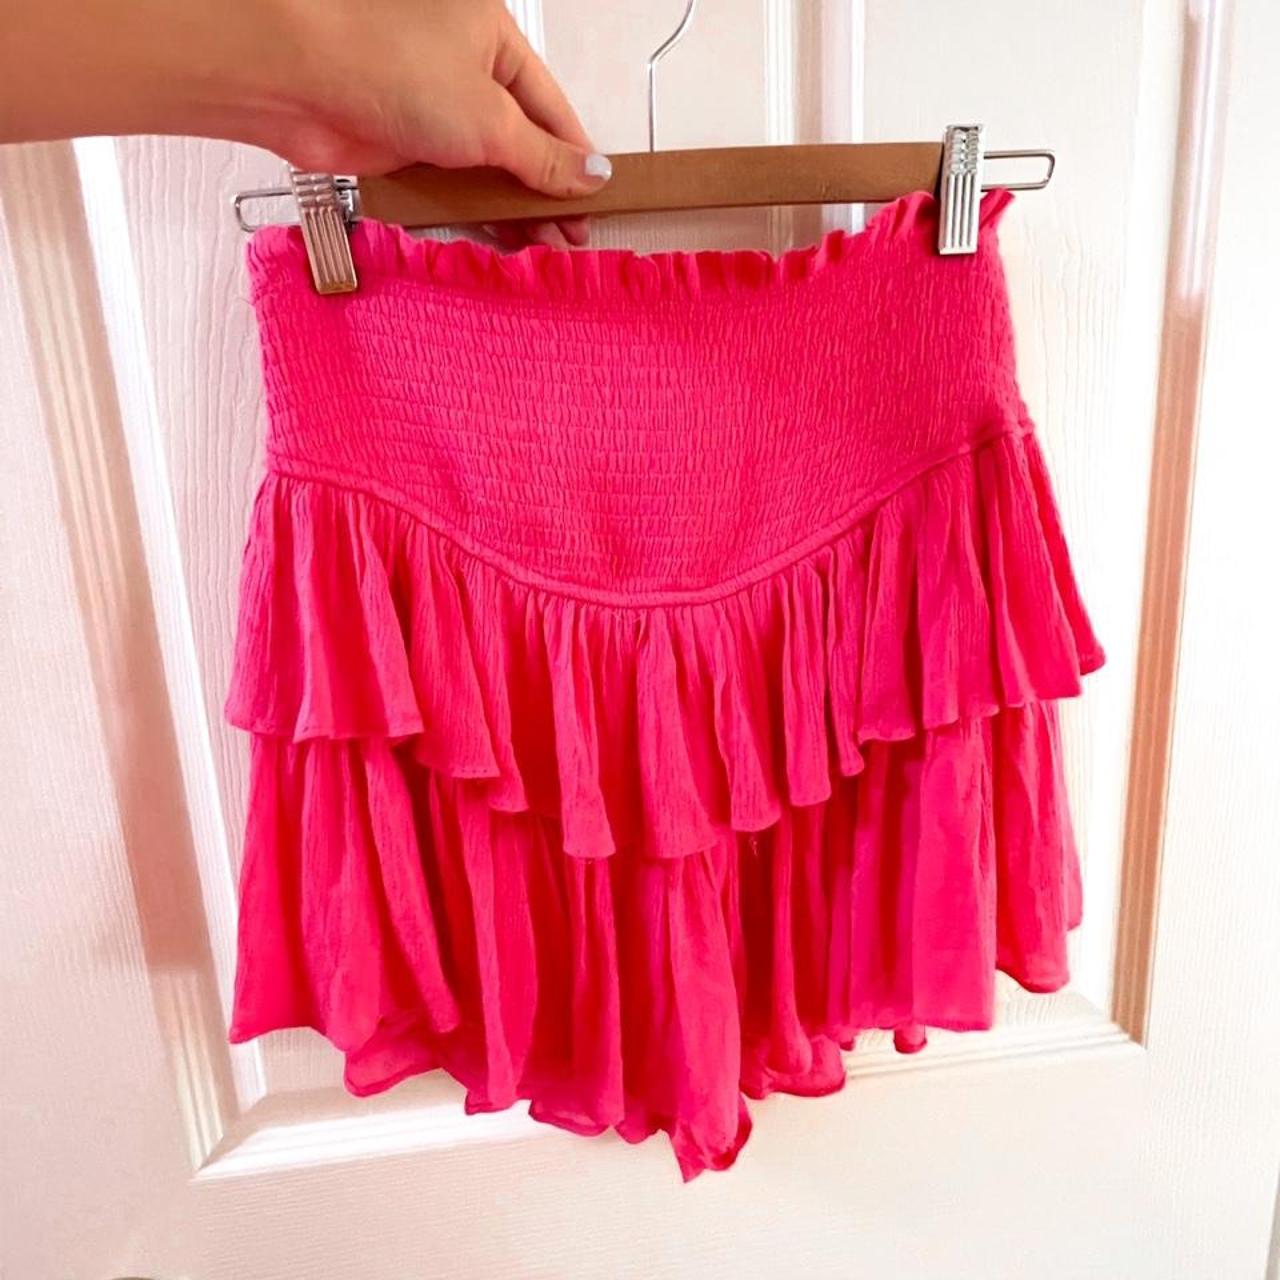 Product Image 2 - HOT PINK RUFFLE SKIRT

* can